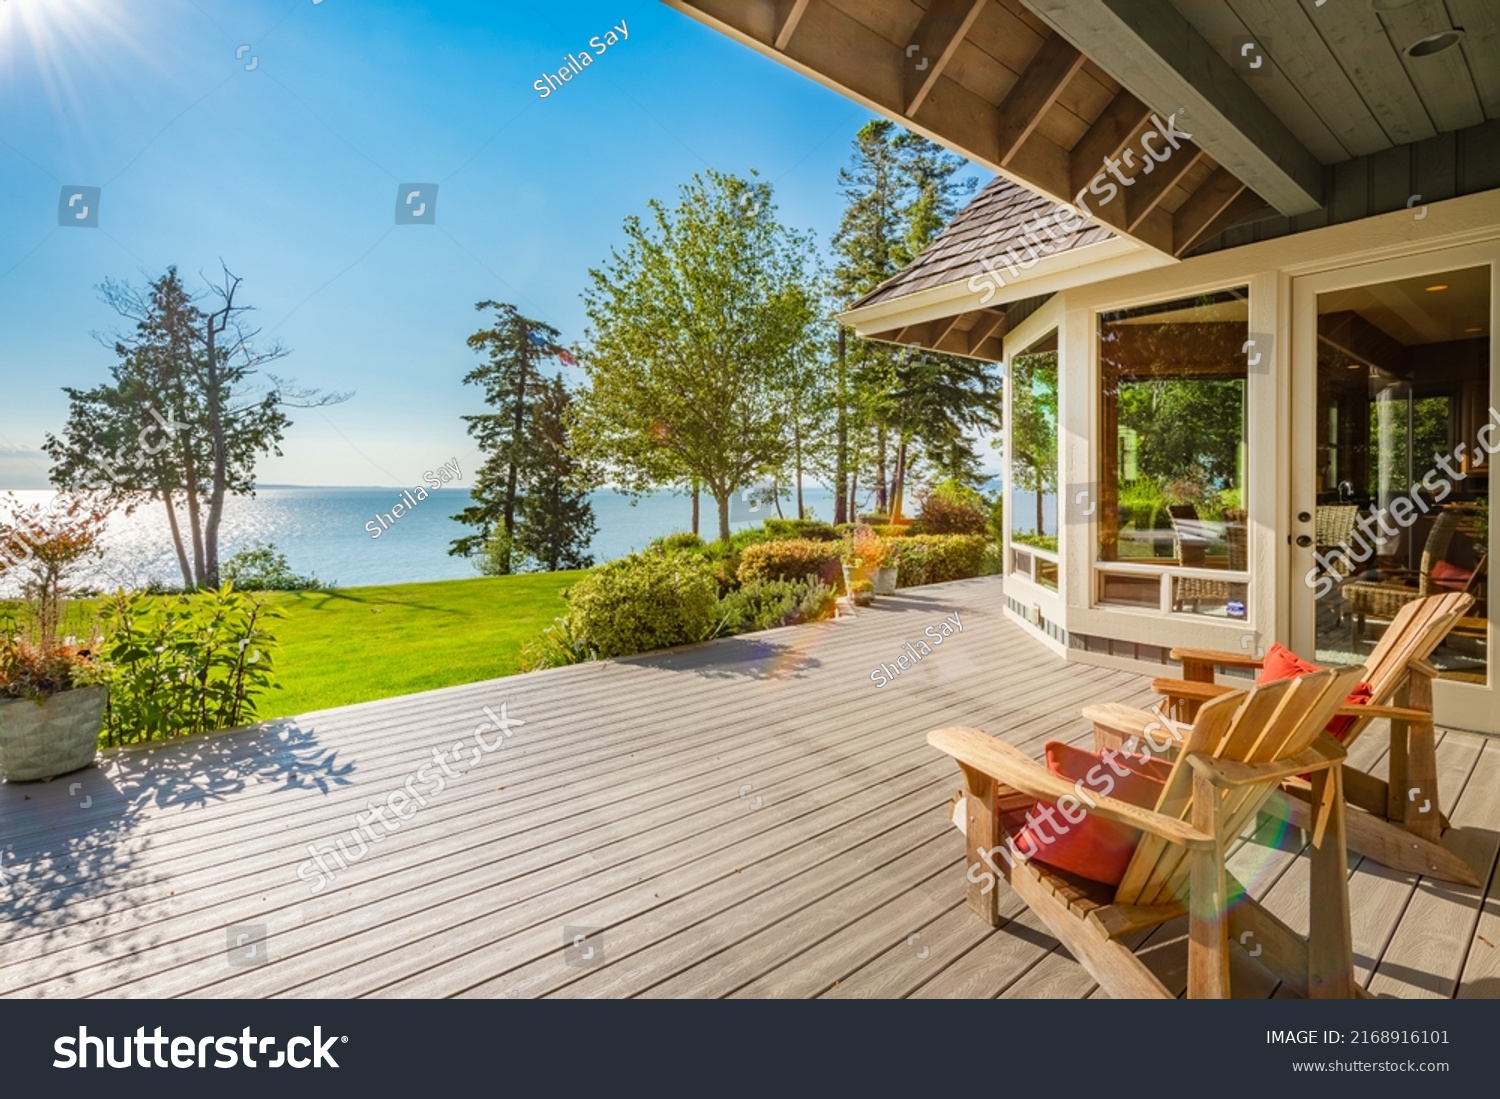 Stately waterfront home in pacific northwest with ocean views expansive decks hot tub front porch and long paved driveway #2168916101